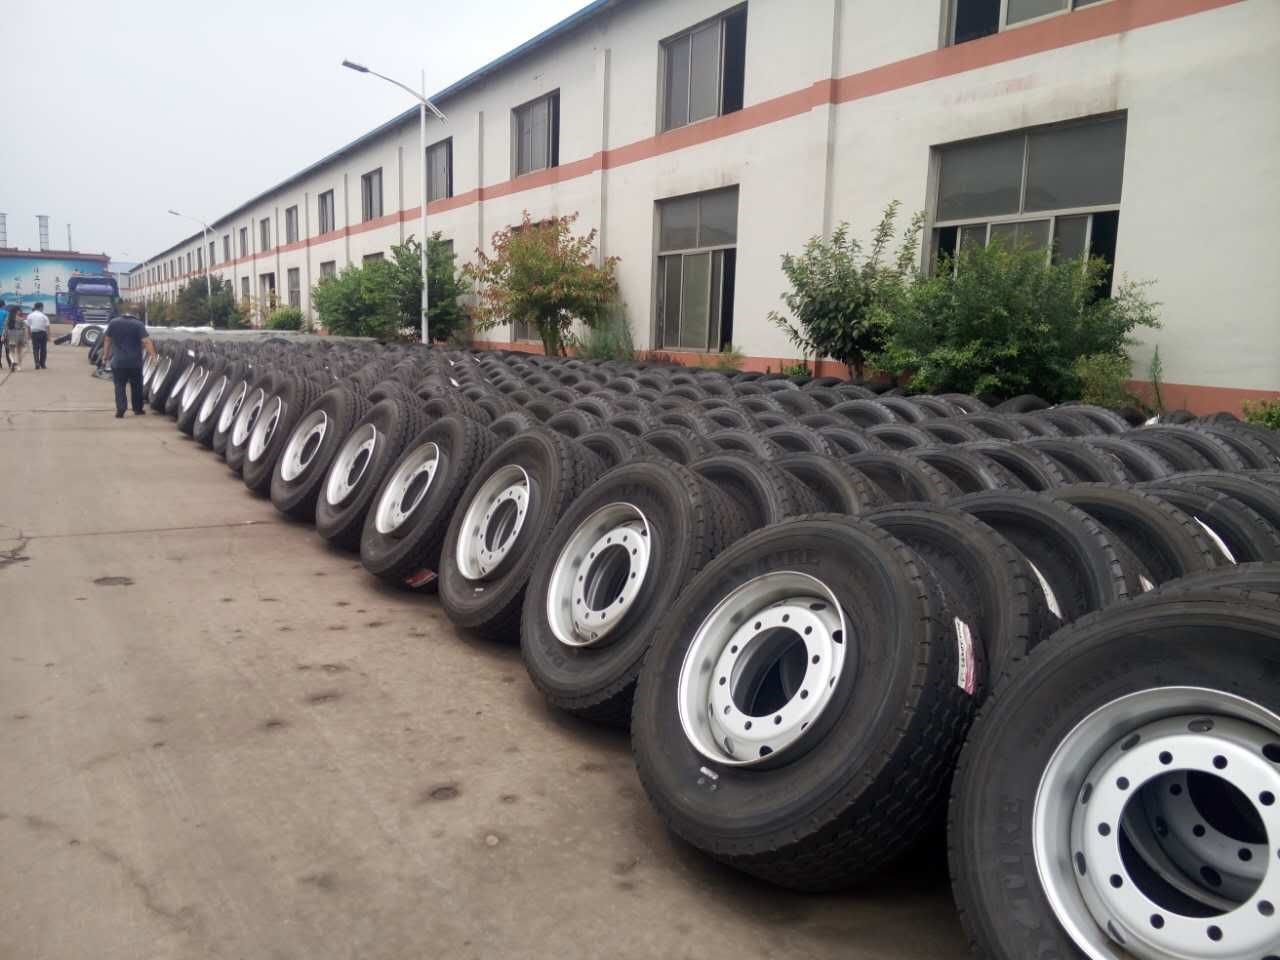 The Chinese tyre industry’s current struggle for survival